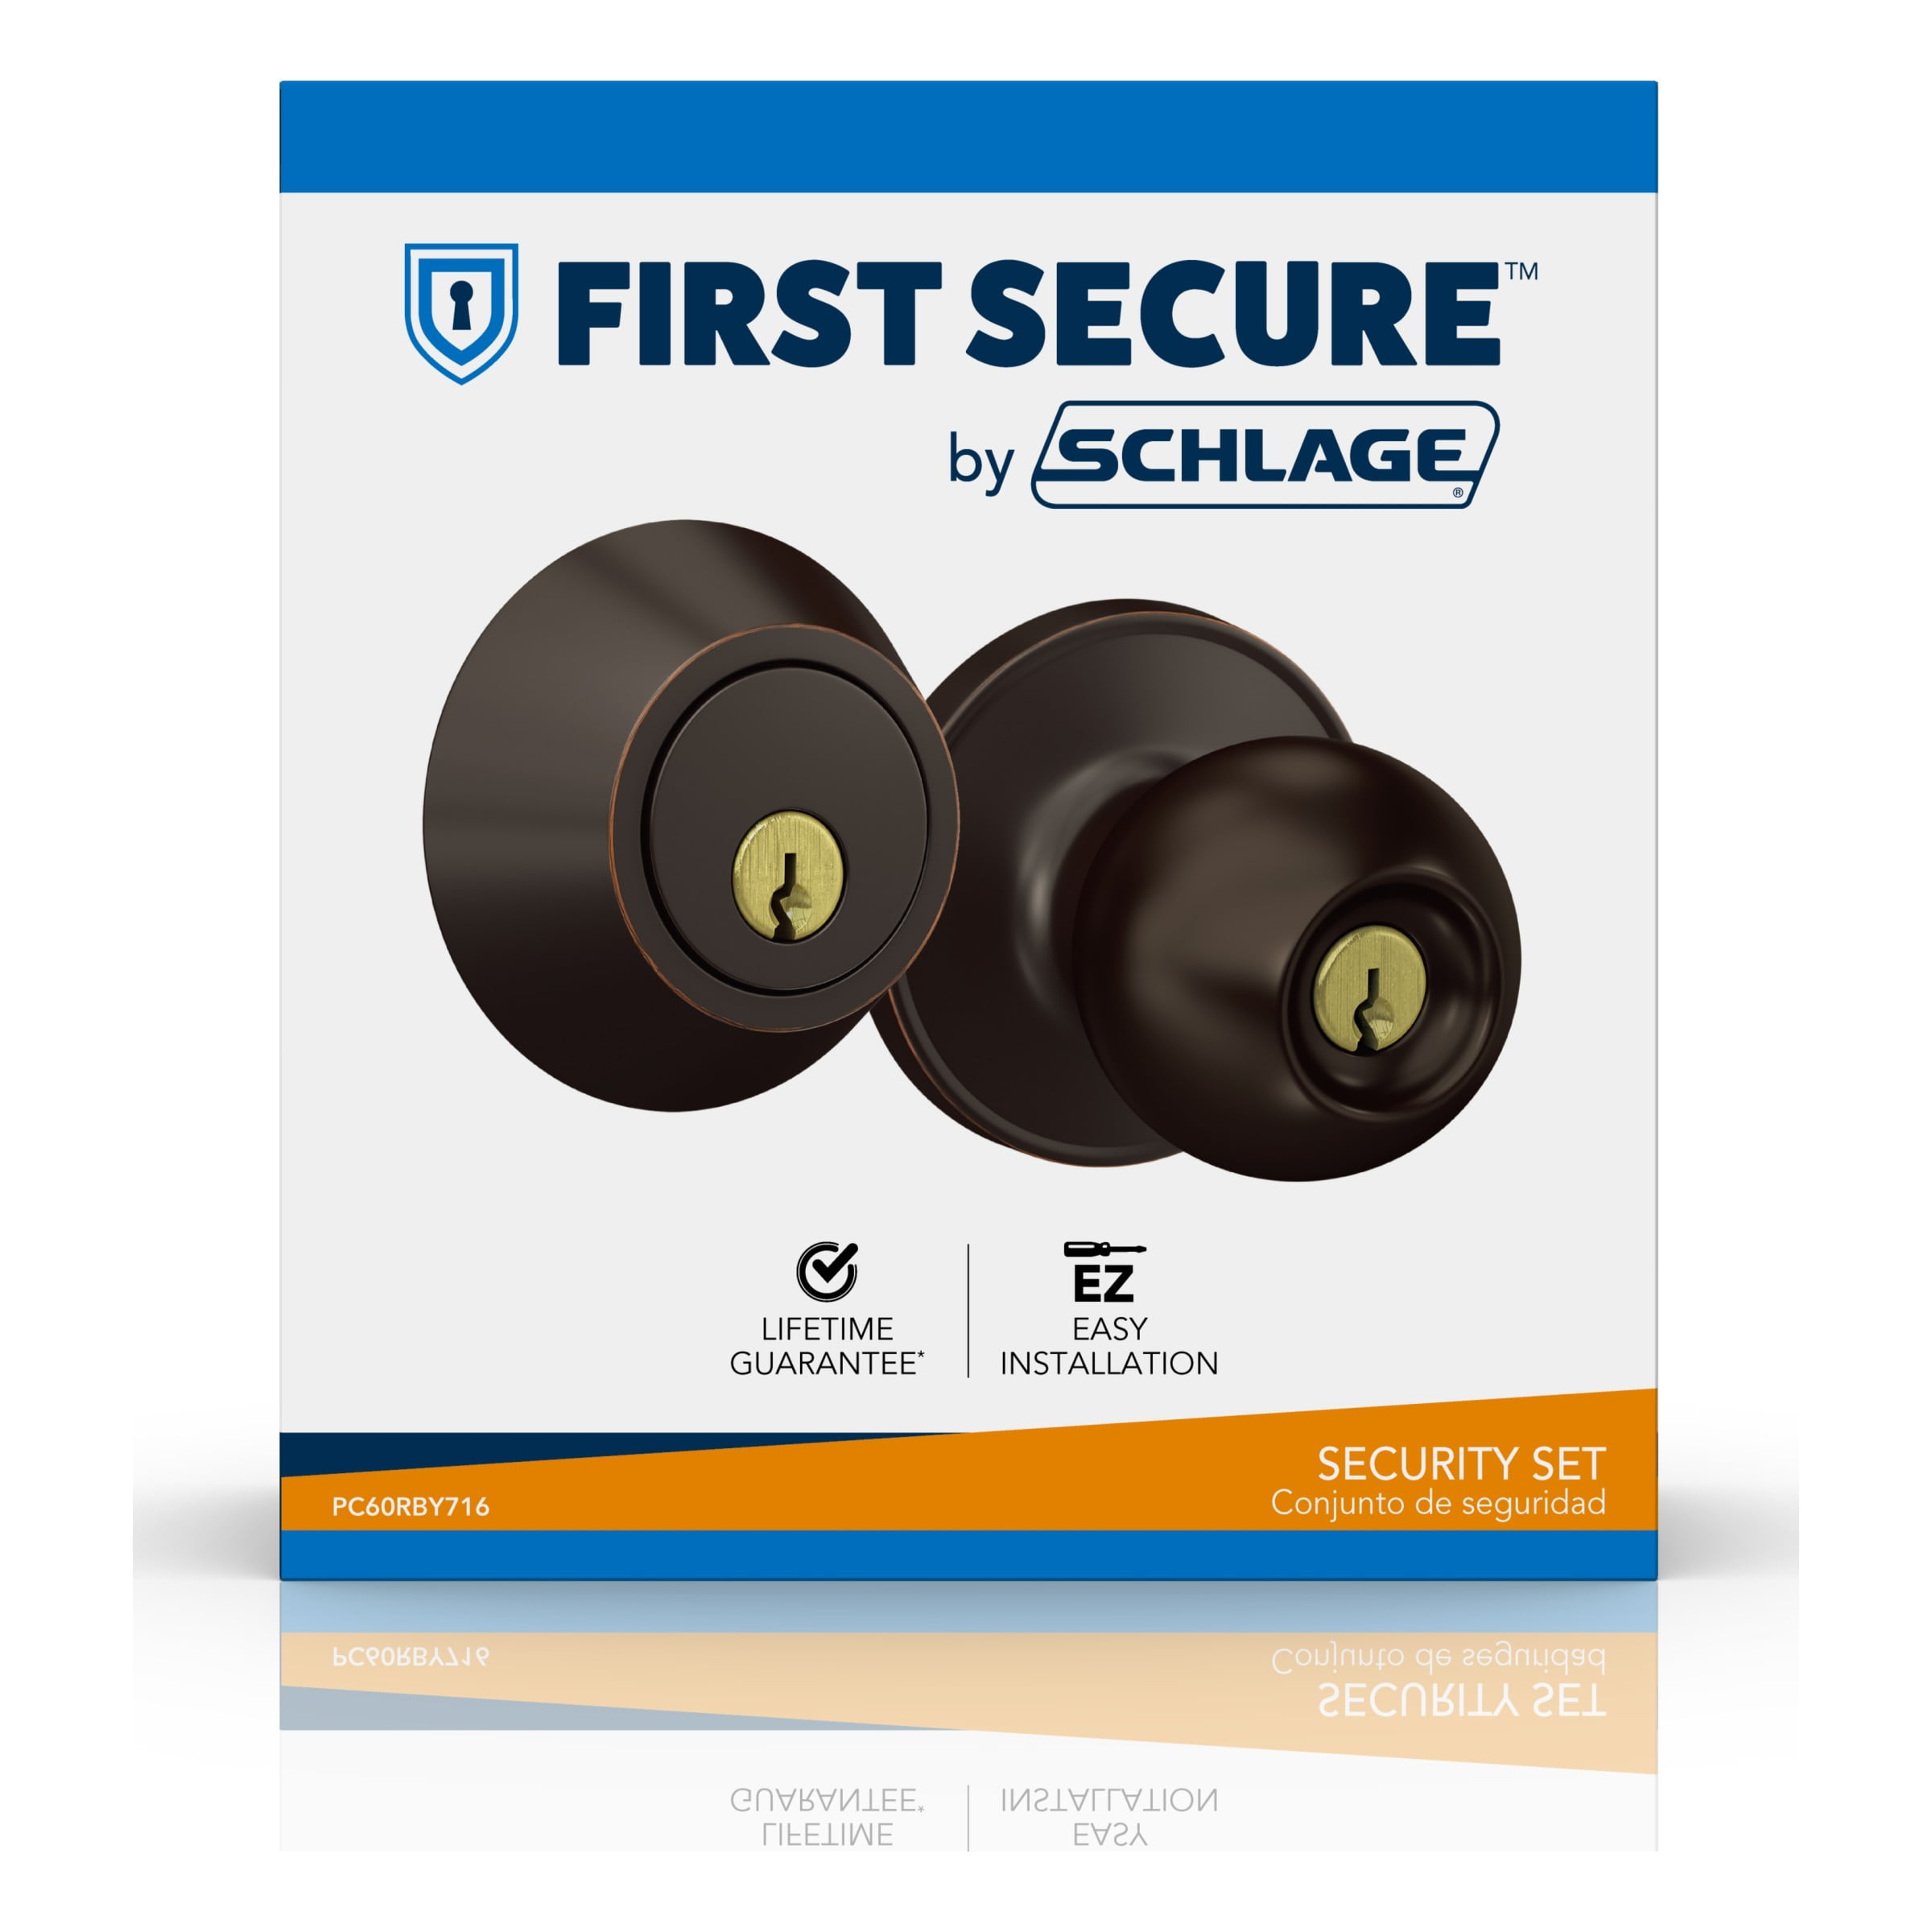 First Secure by Schlage Rigsby Bed / Bath Privacy Door Knob in